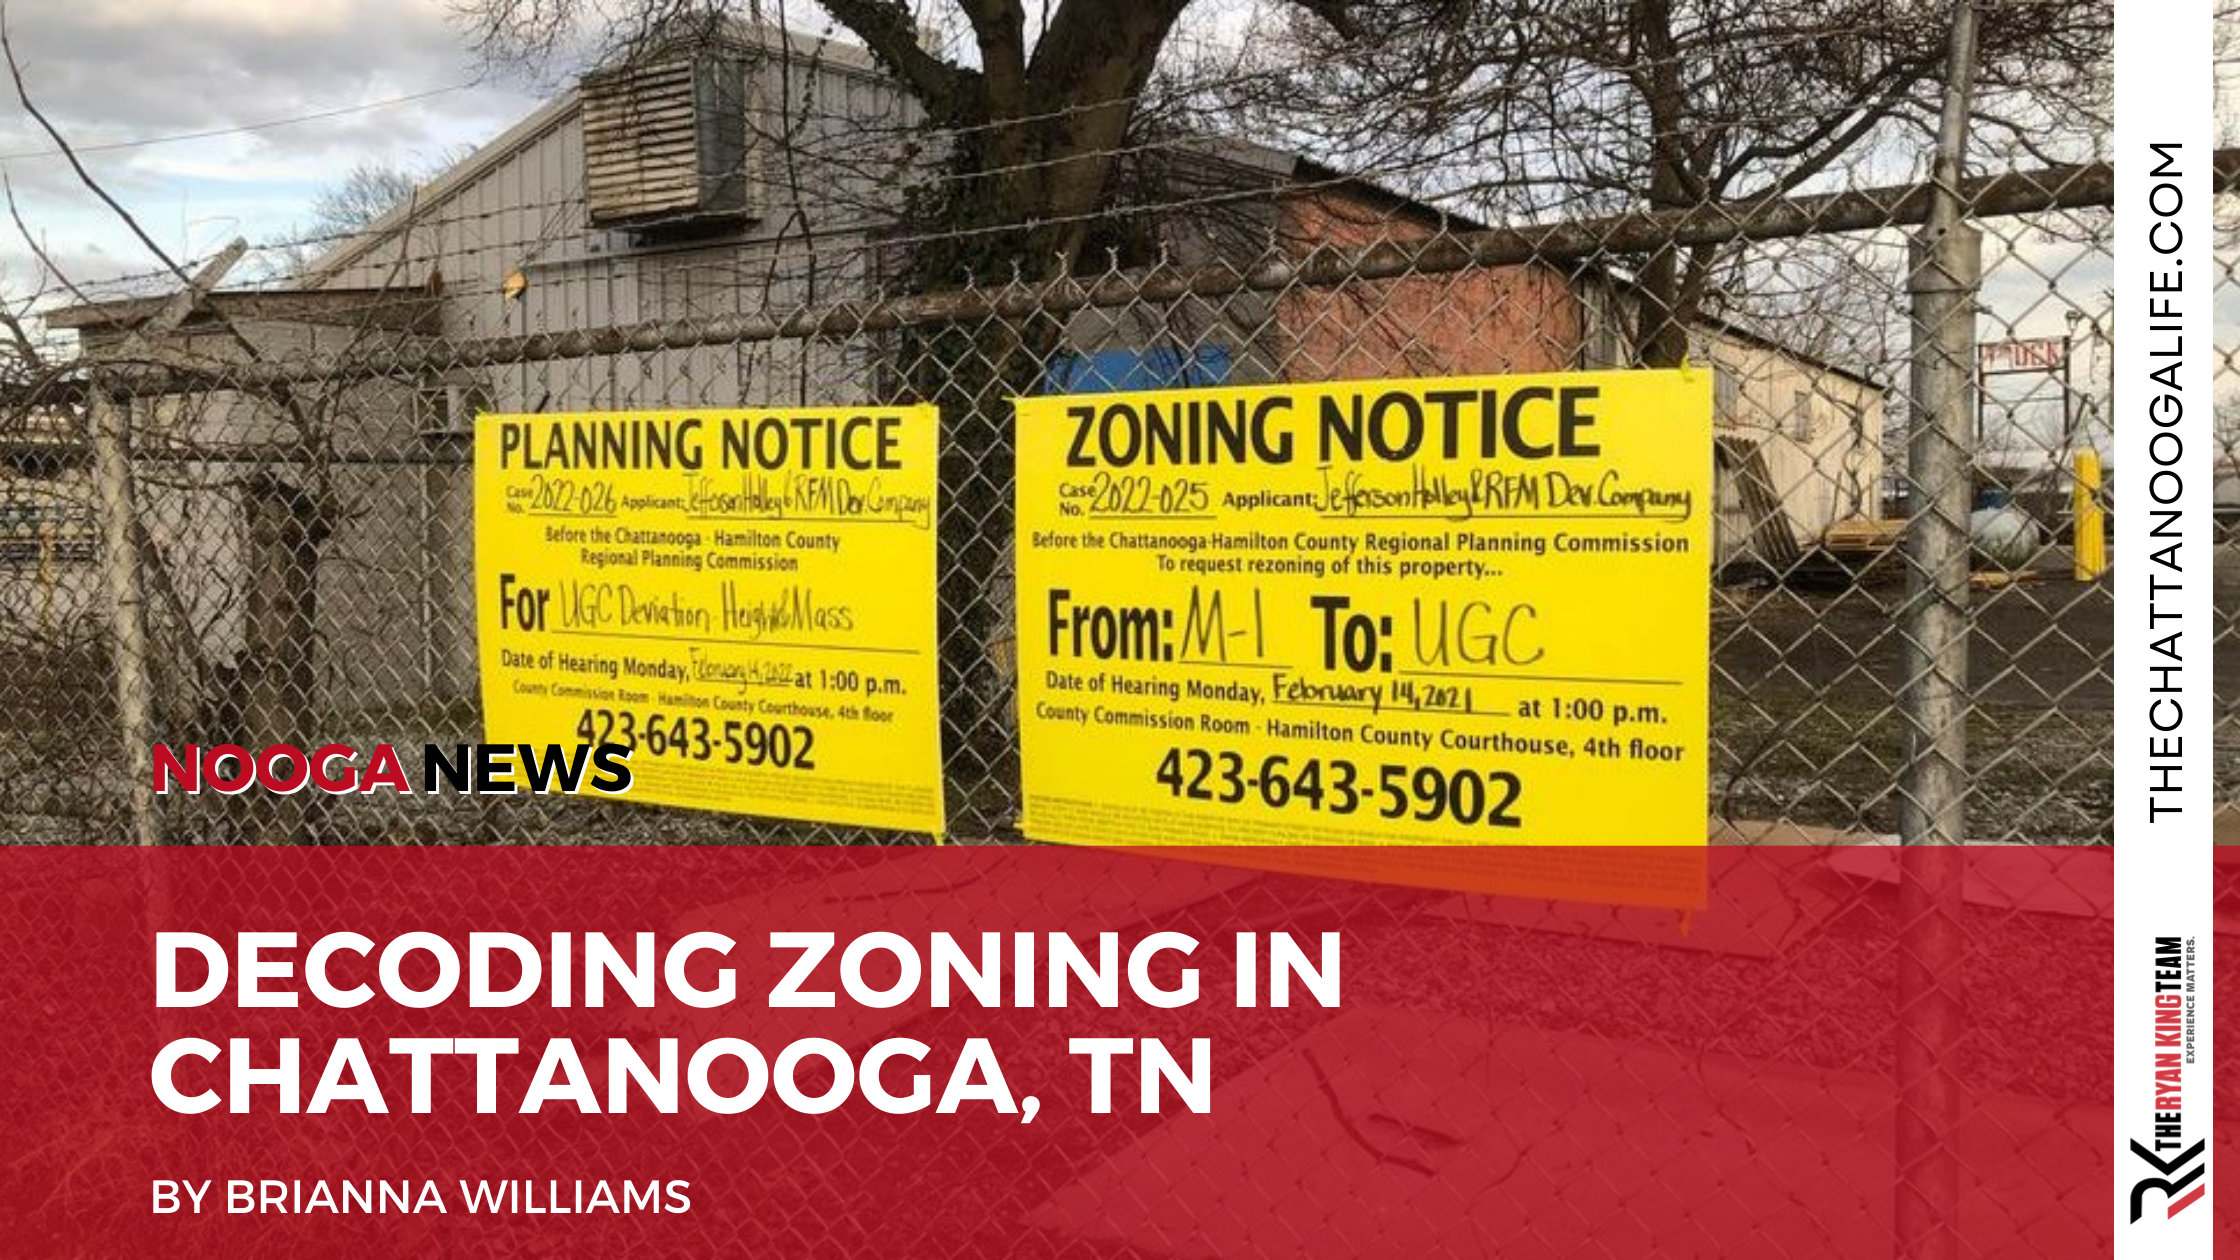 Decoding zoning in Chattanooga, TN